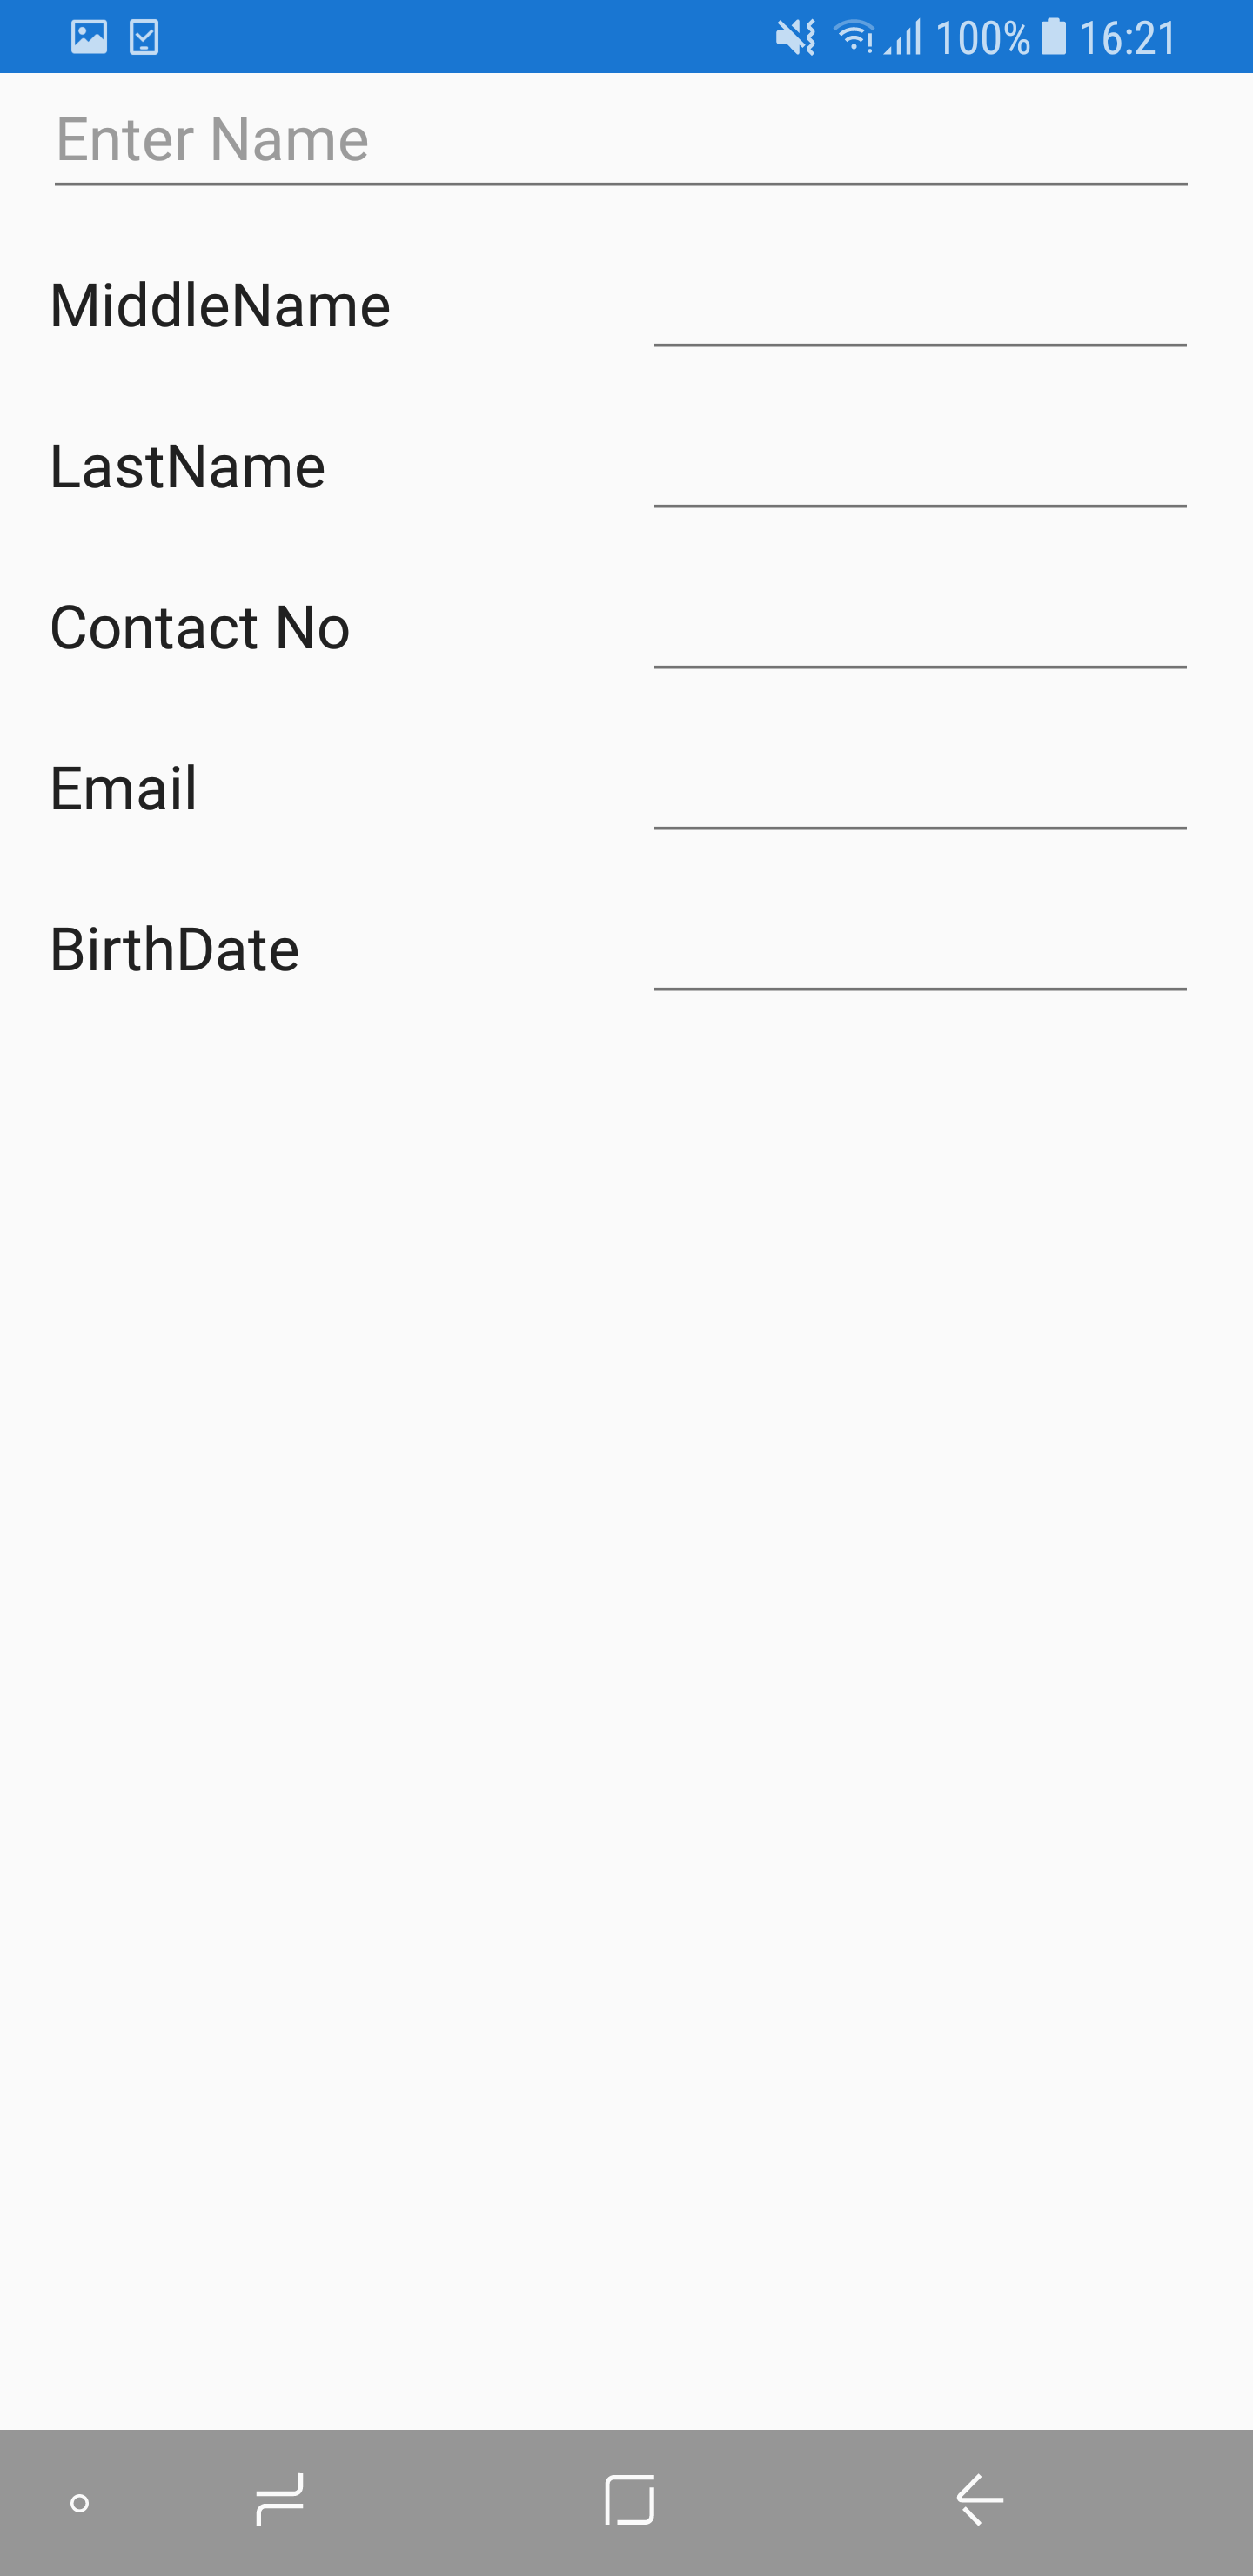 Hiding label of data form field in Xamarin.Forms DataForm